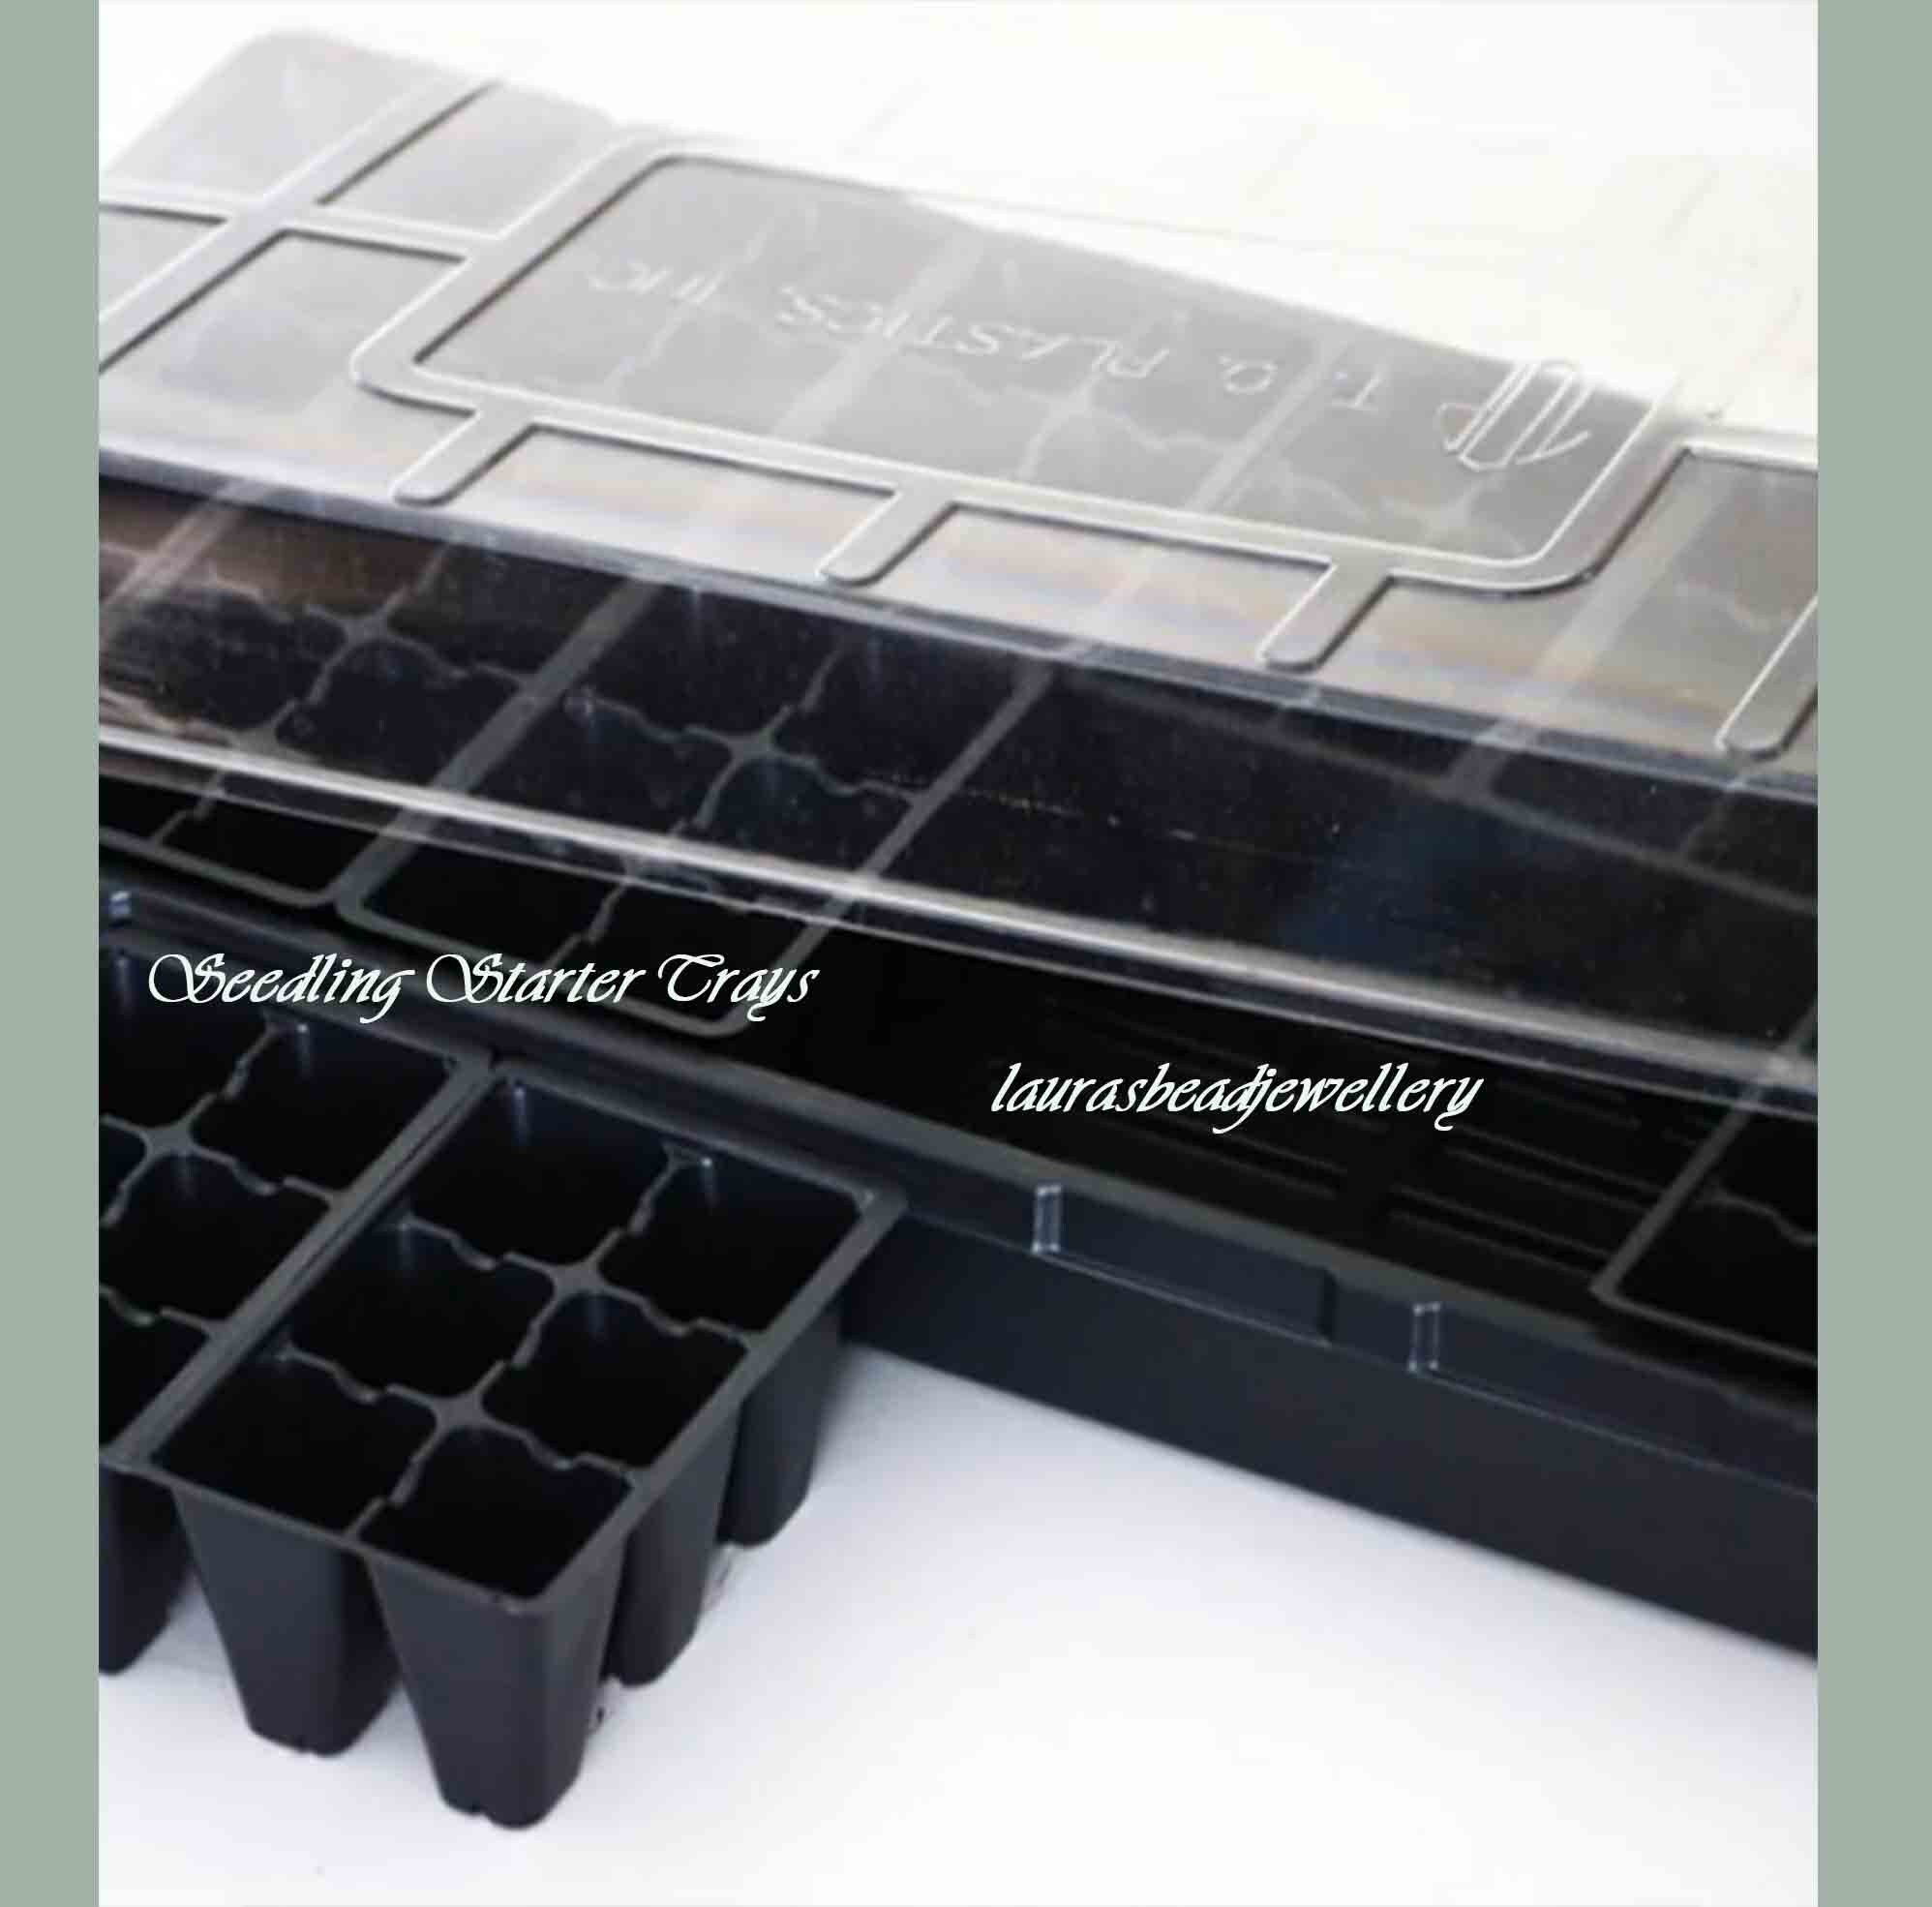 Seed Starting Tray Insert 144 Cells = 24 Six Packs = 2 Flats 8 Plant Labels 